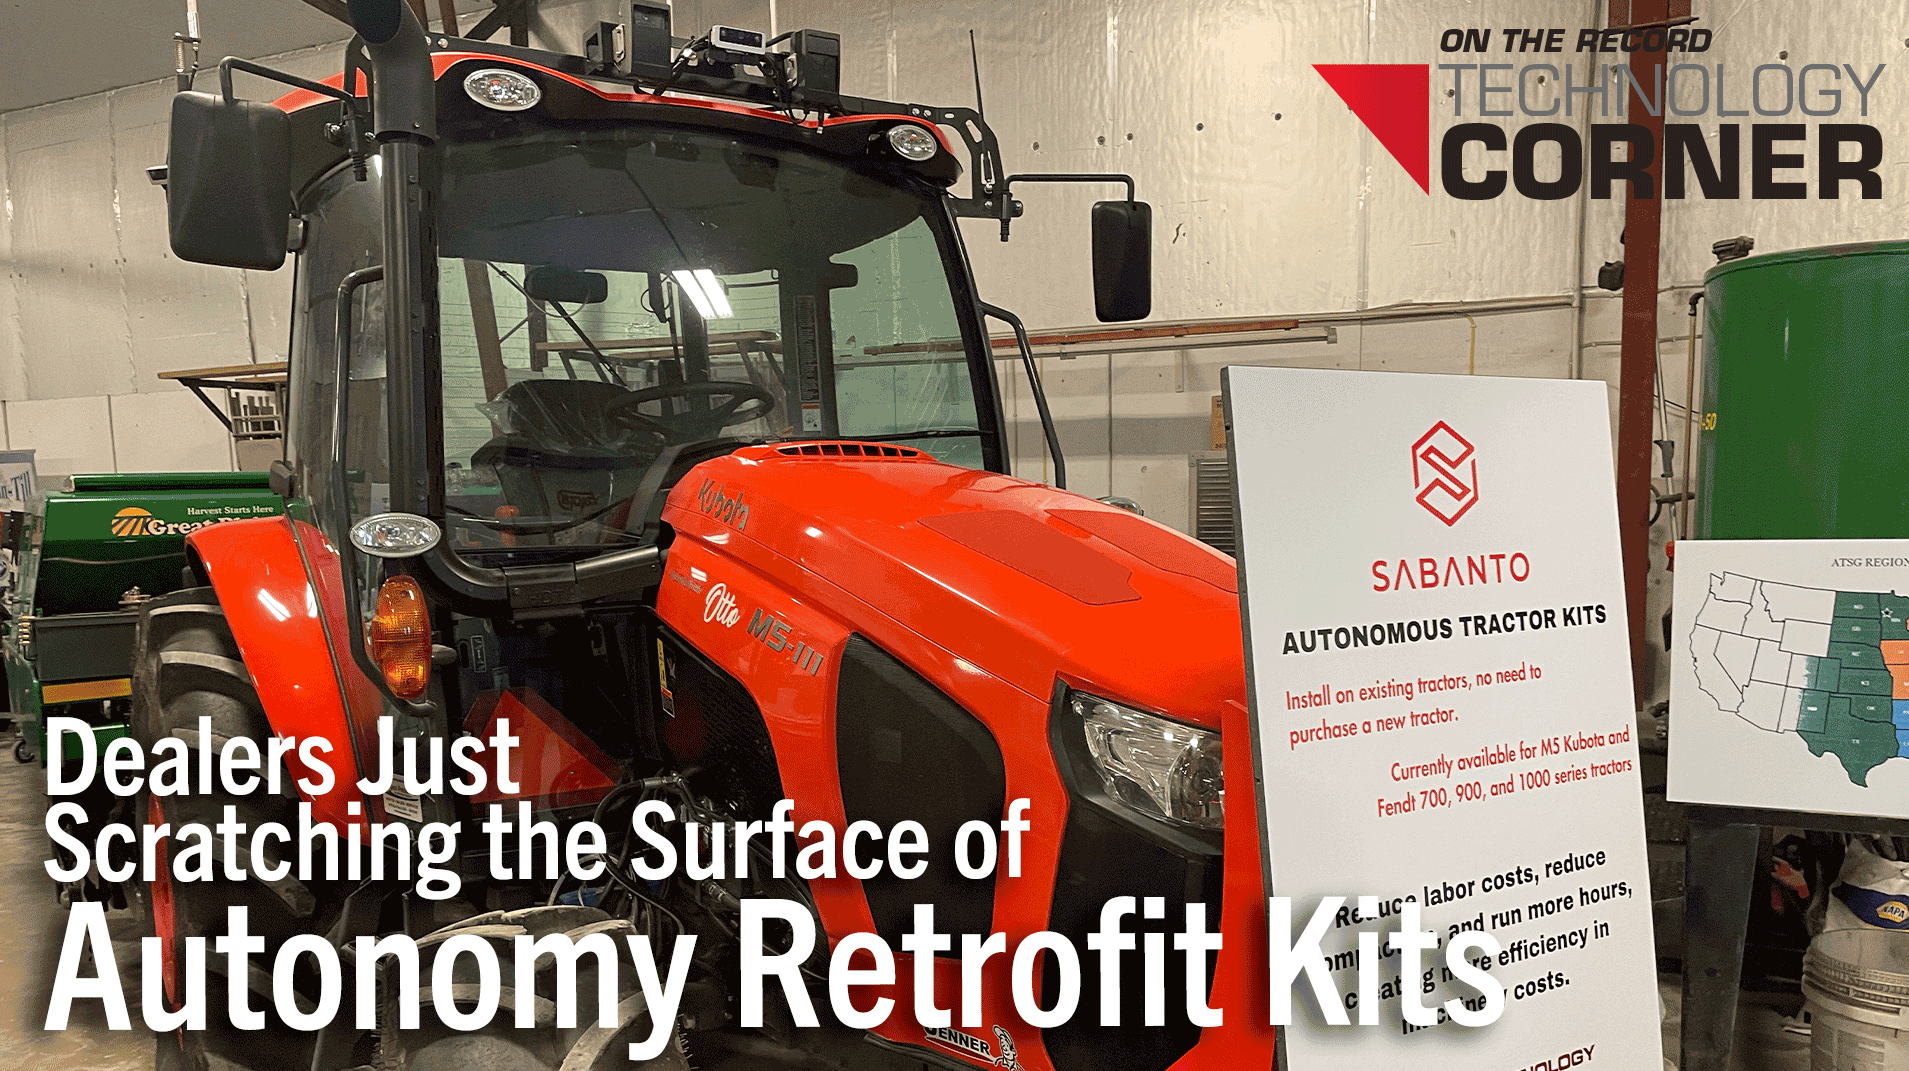 Exploring Autonomy Retrofit Kits: Technology Corner Dealers Just Beginning to Scratch the Surface